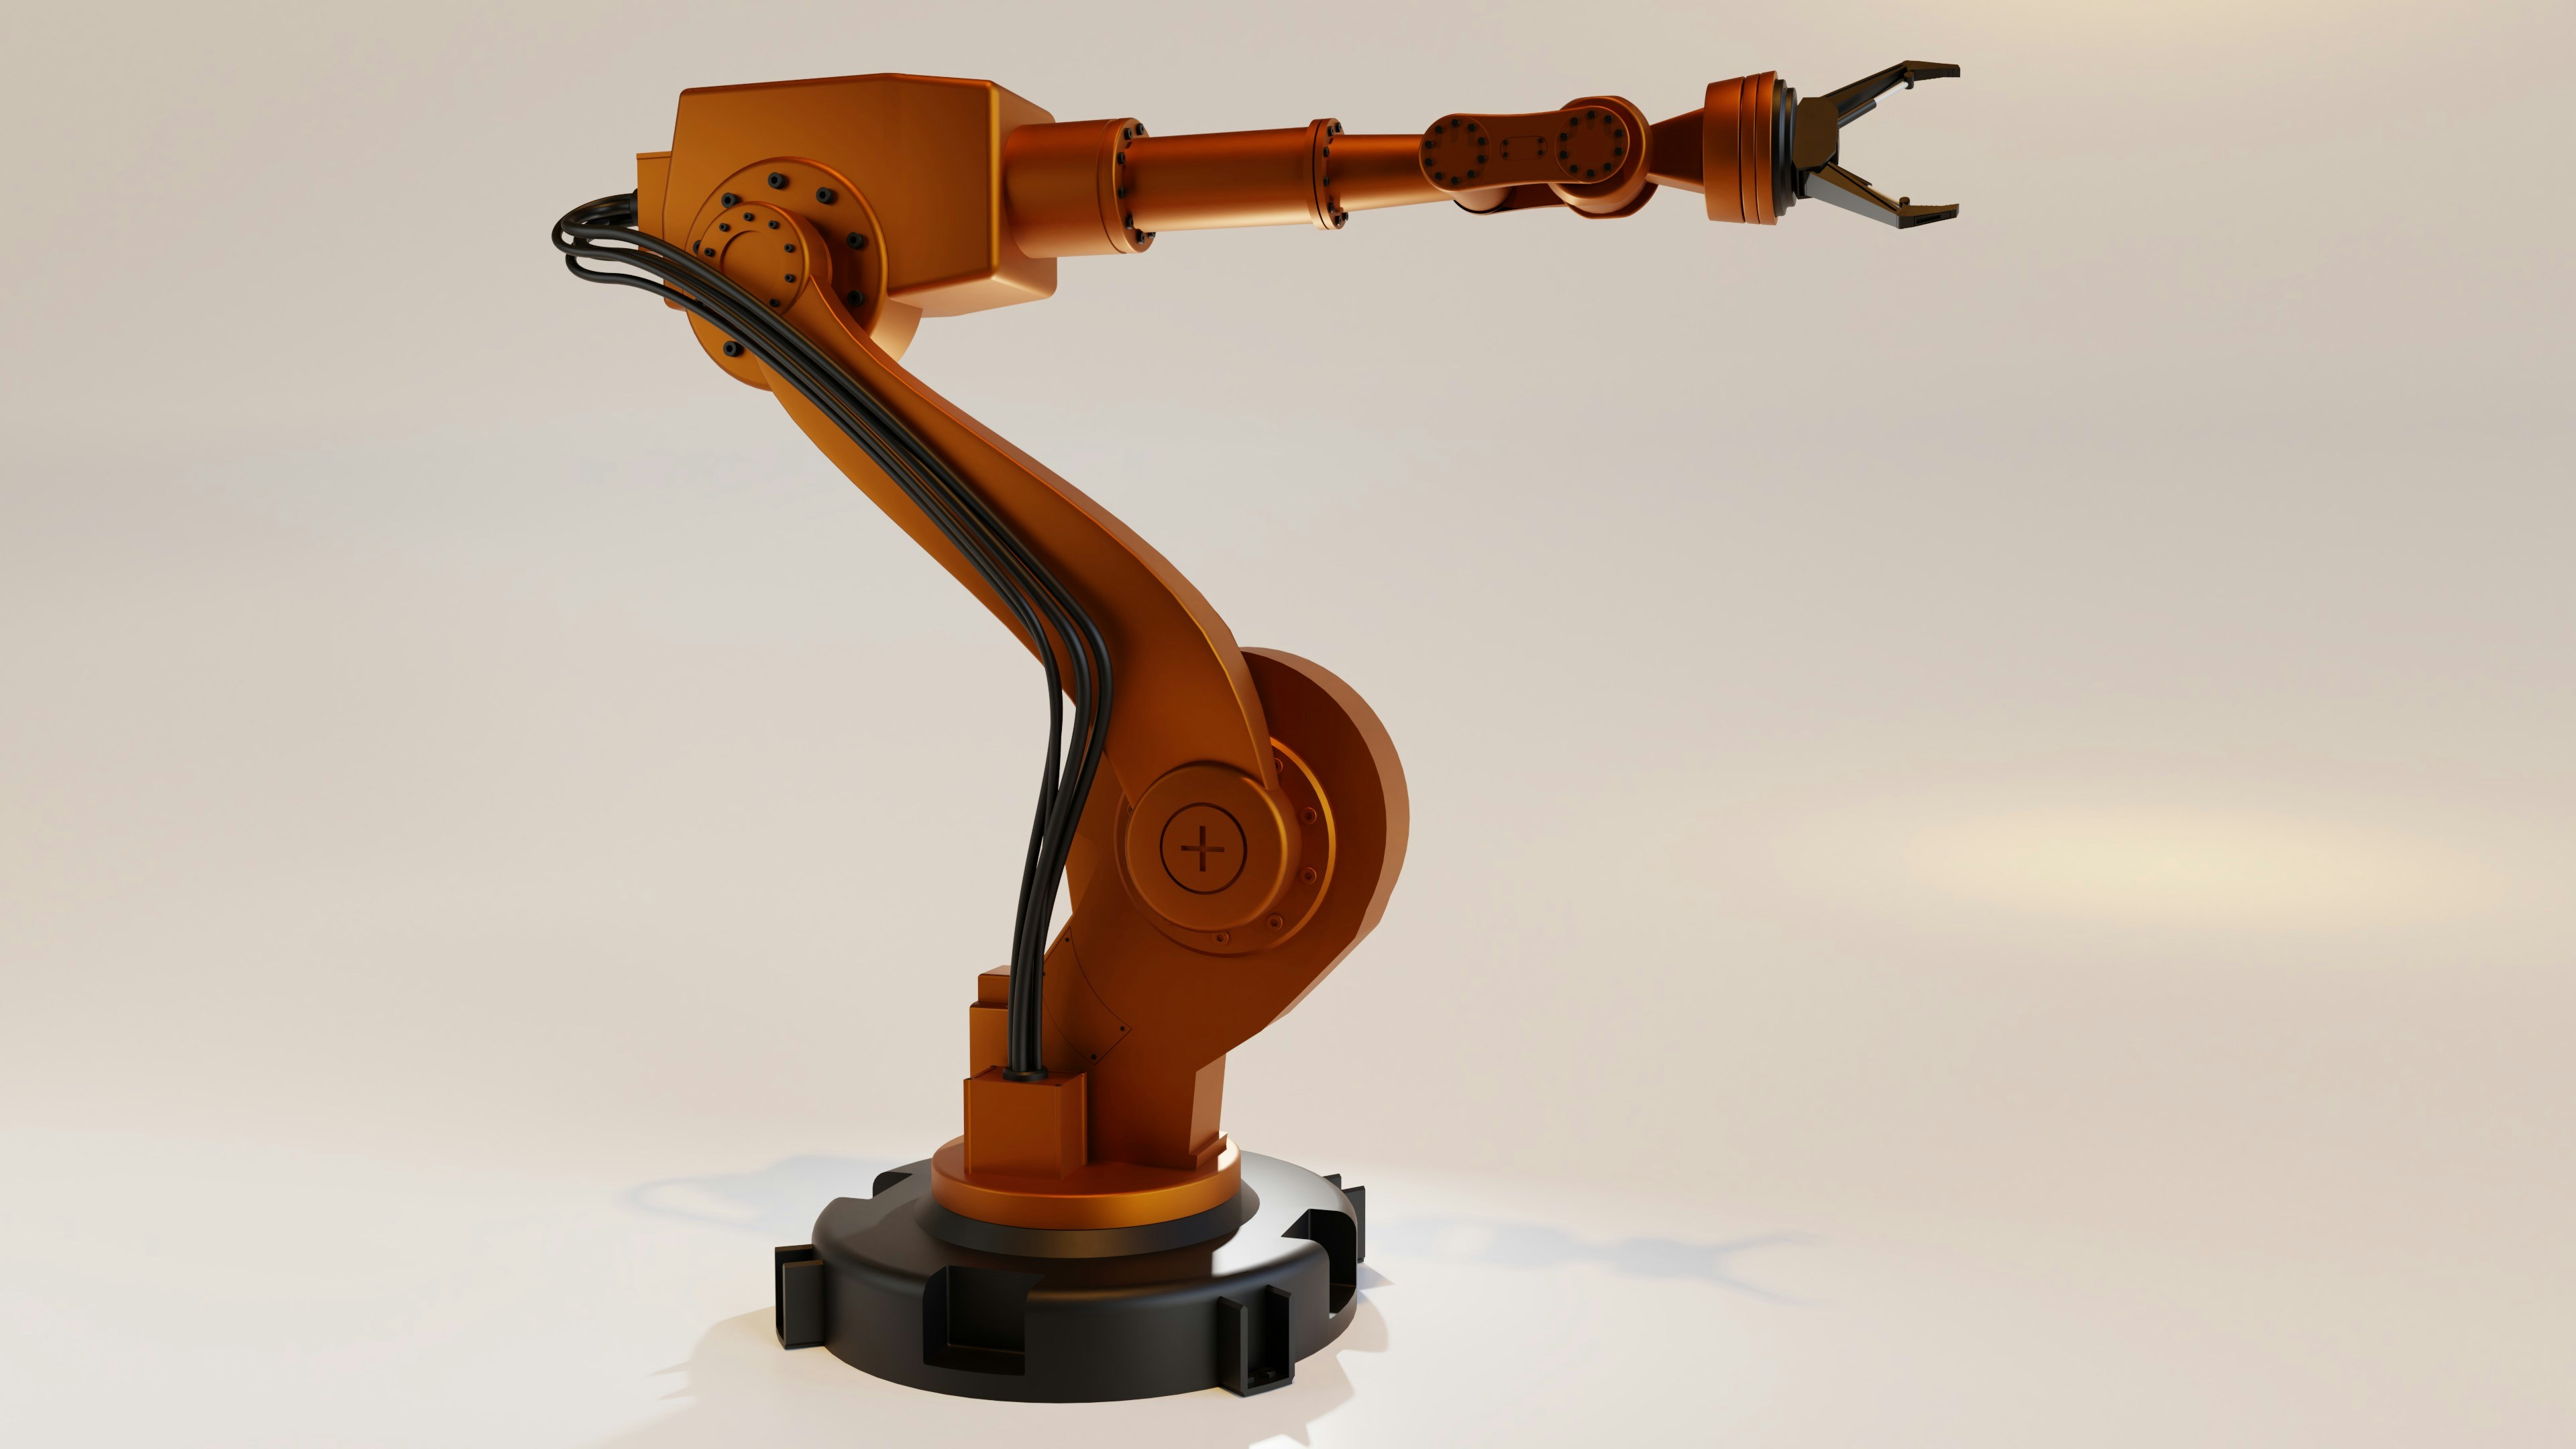 An orange robotic arm on a black pedestal, in front of a white background